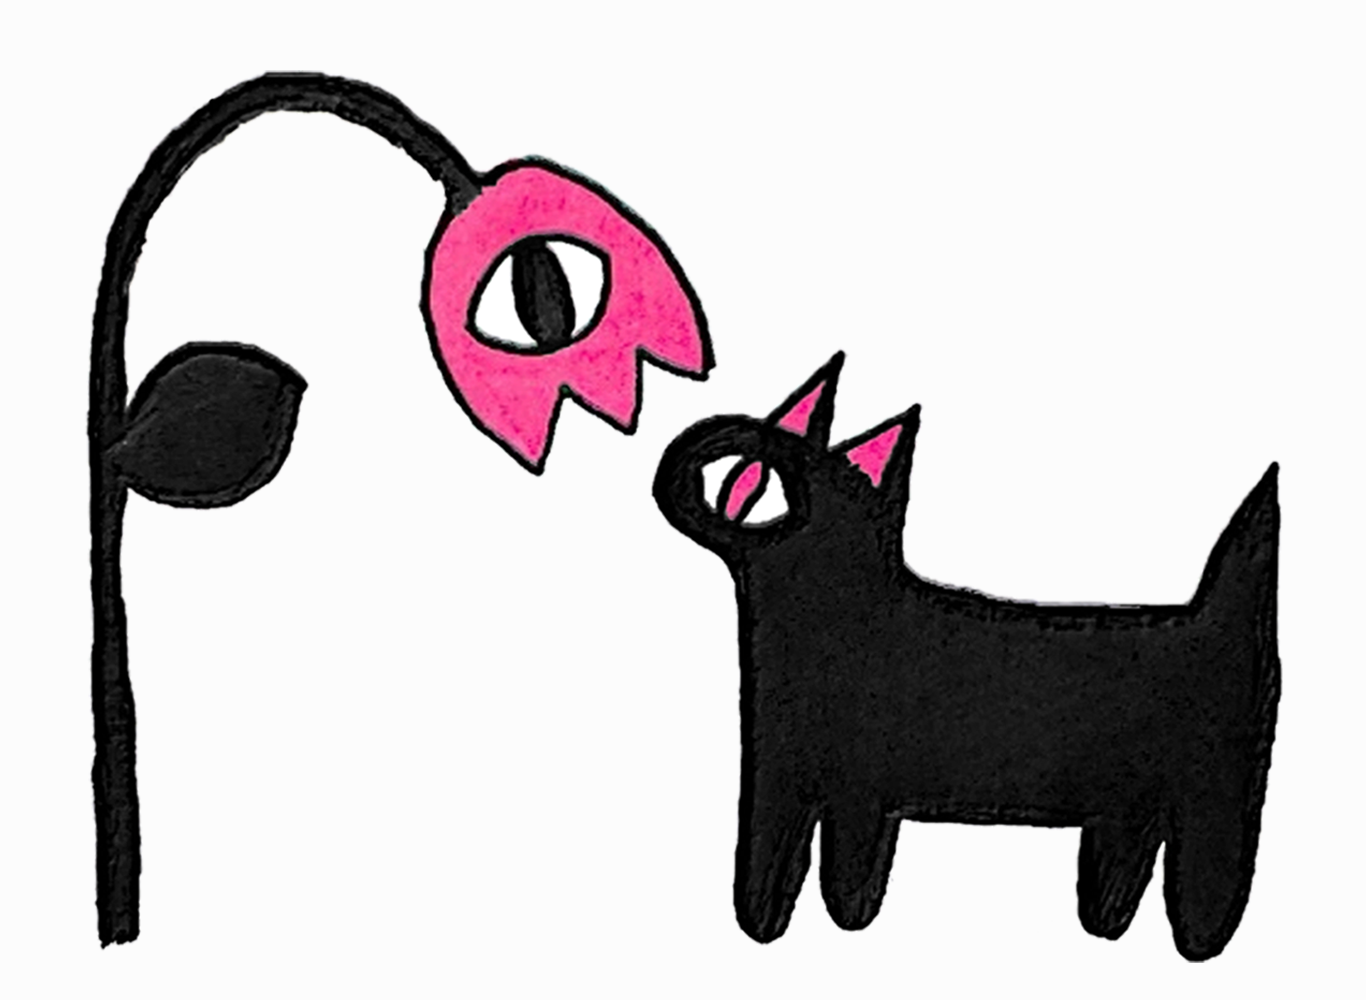 Drawing of a simply stylized, vaguely cat-like critter that is solid black with pink details, looking up towards a pink flower with a black stem, leaf, and one eye with a black pupil. The flower is bending down towards the critter, almost touching their nose. The entire composition lies on a slightly off-white background.